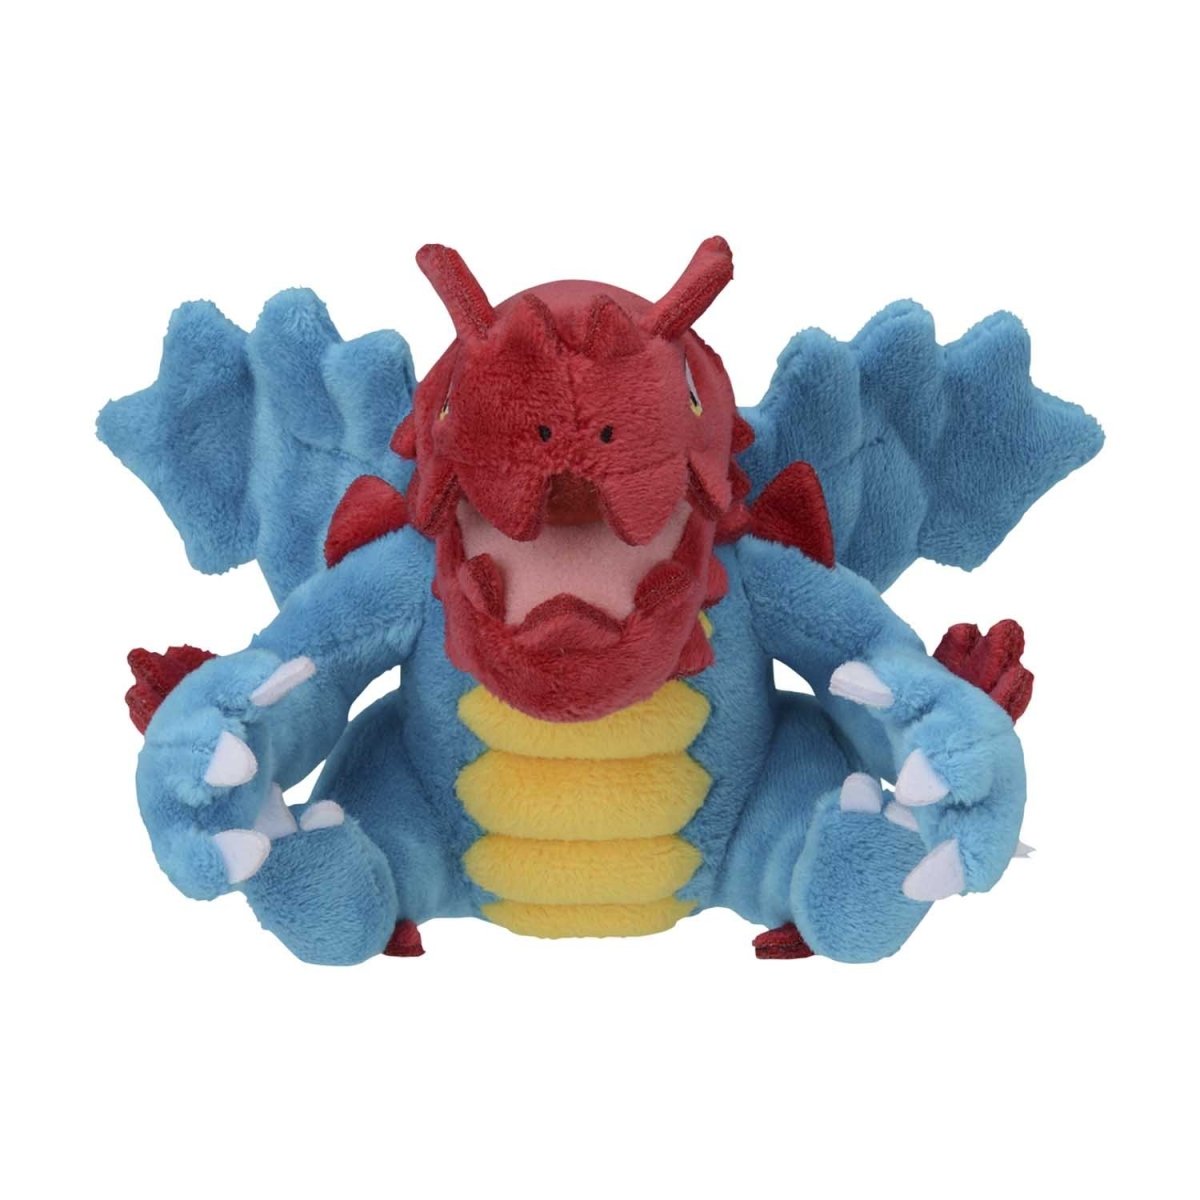 Find Fun, Creative pokemon dragon doll and Toys For All 